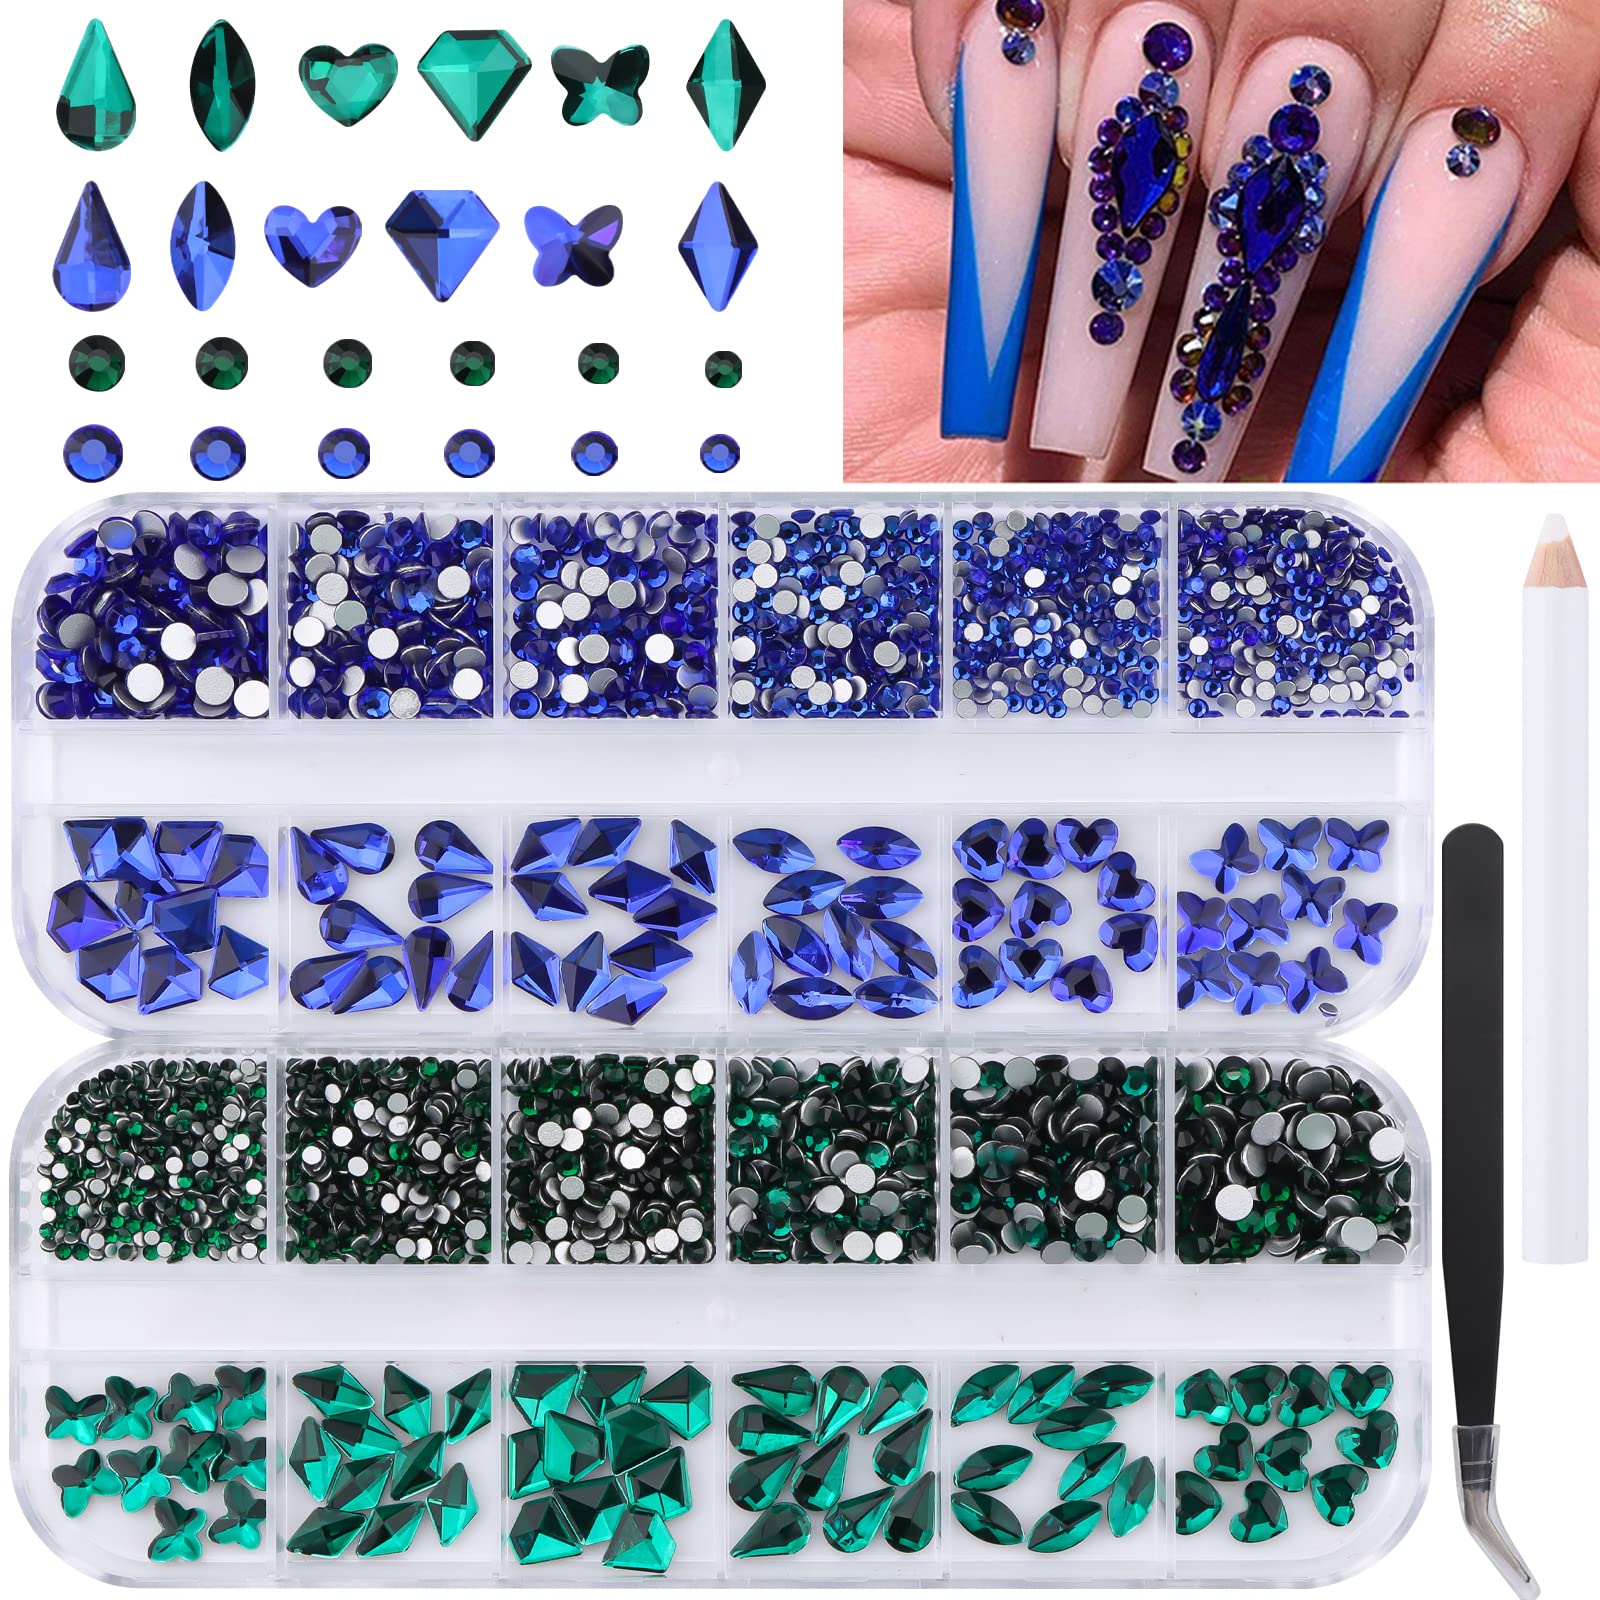 Colorful Crystal Nail Decorations Multi Size Acrylic Round